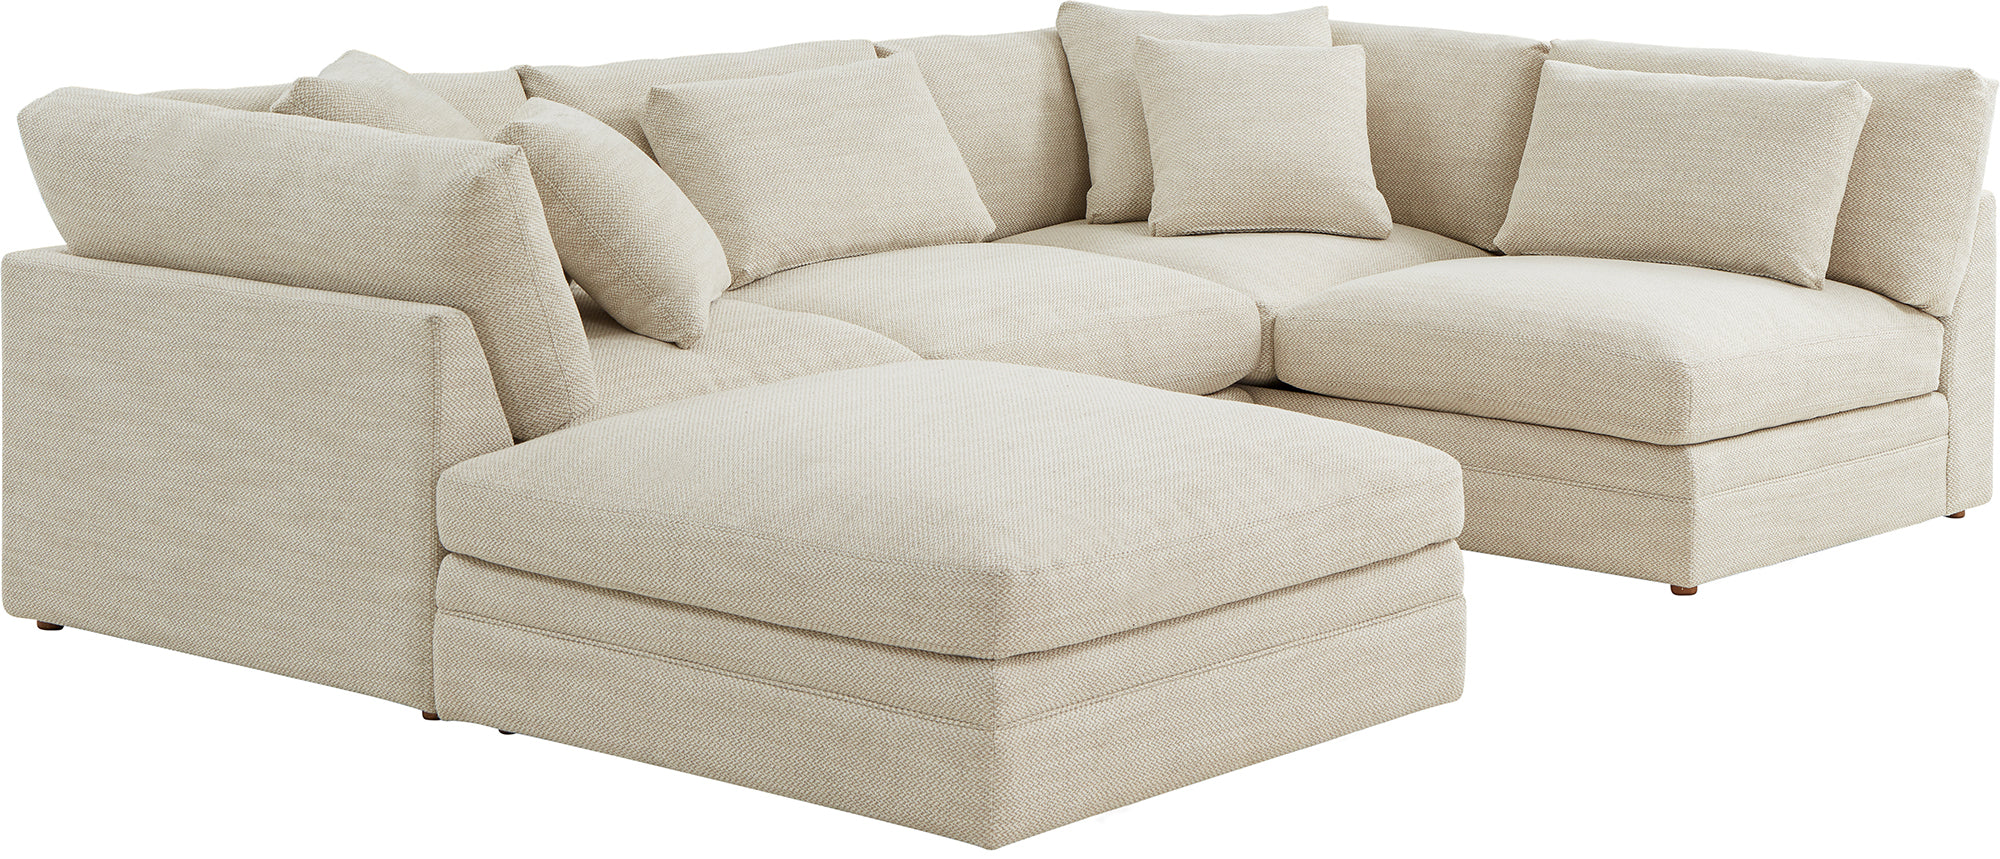 Feel Good Sectional with Ottoman, Right, Oyster - Image 8